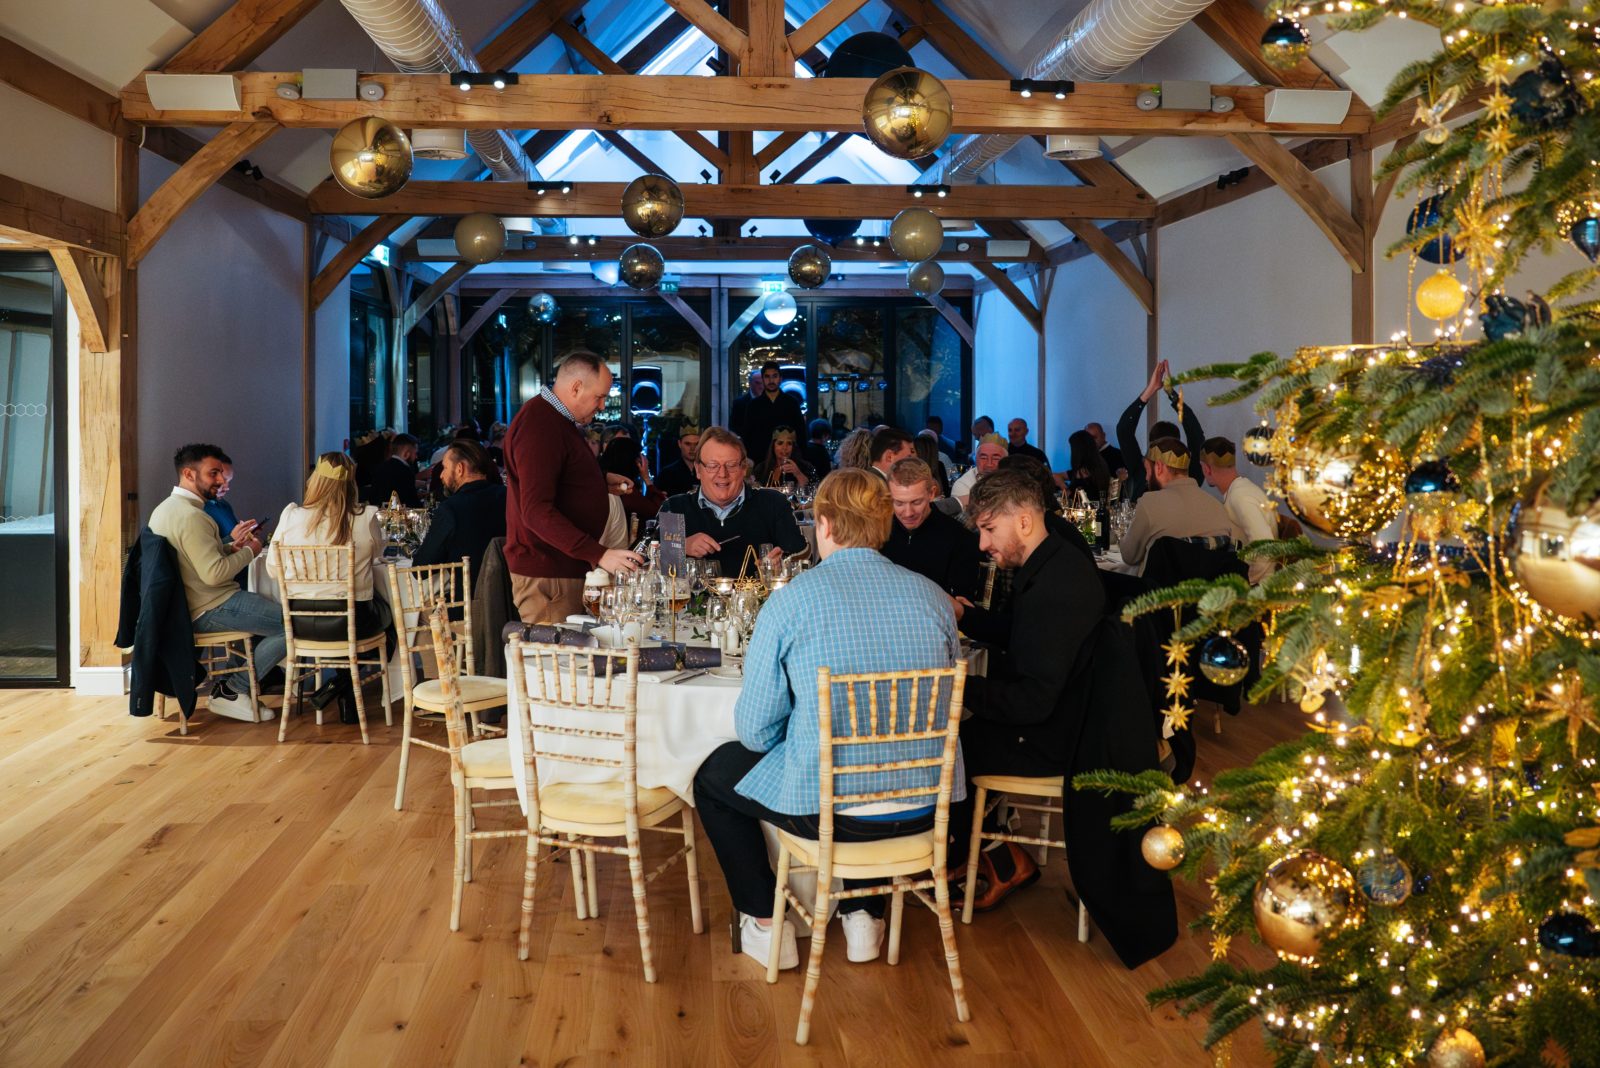 The Best Wedding Venues East Sussex Has to Offer